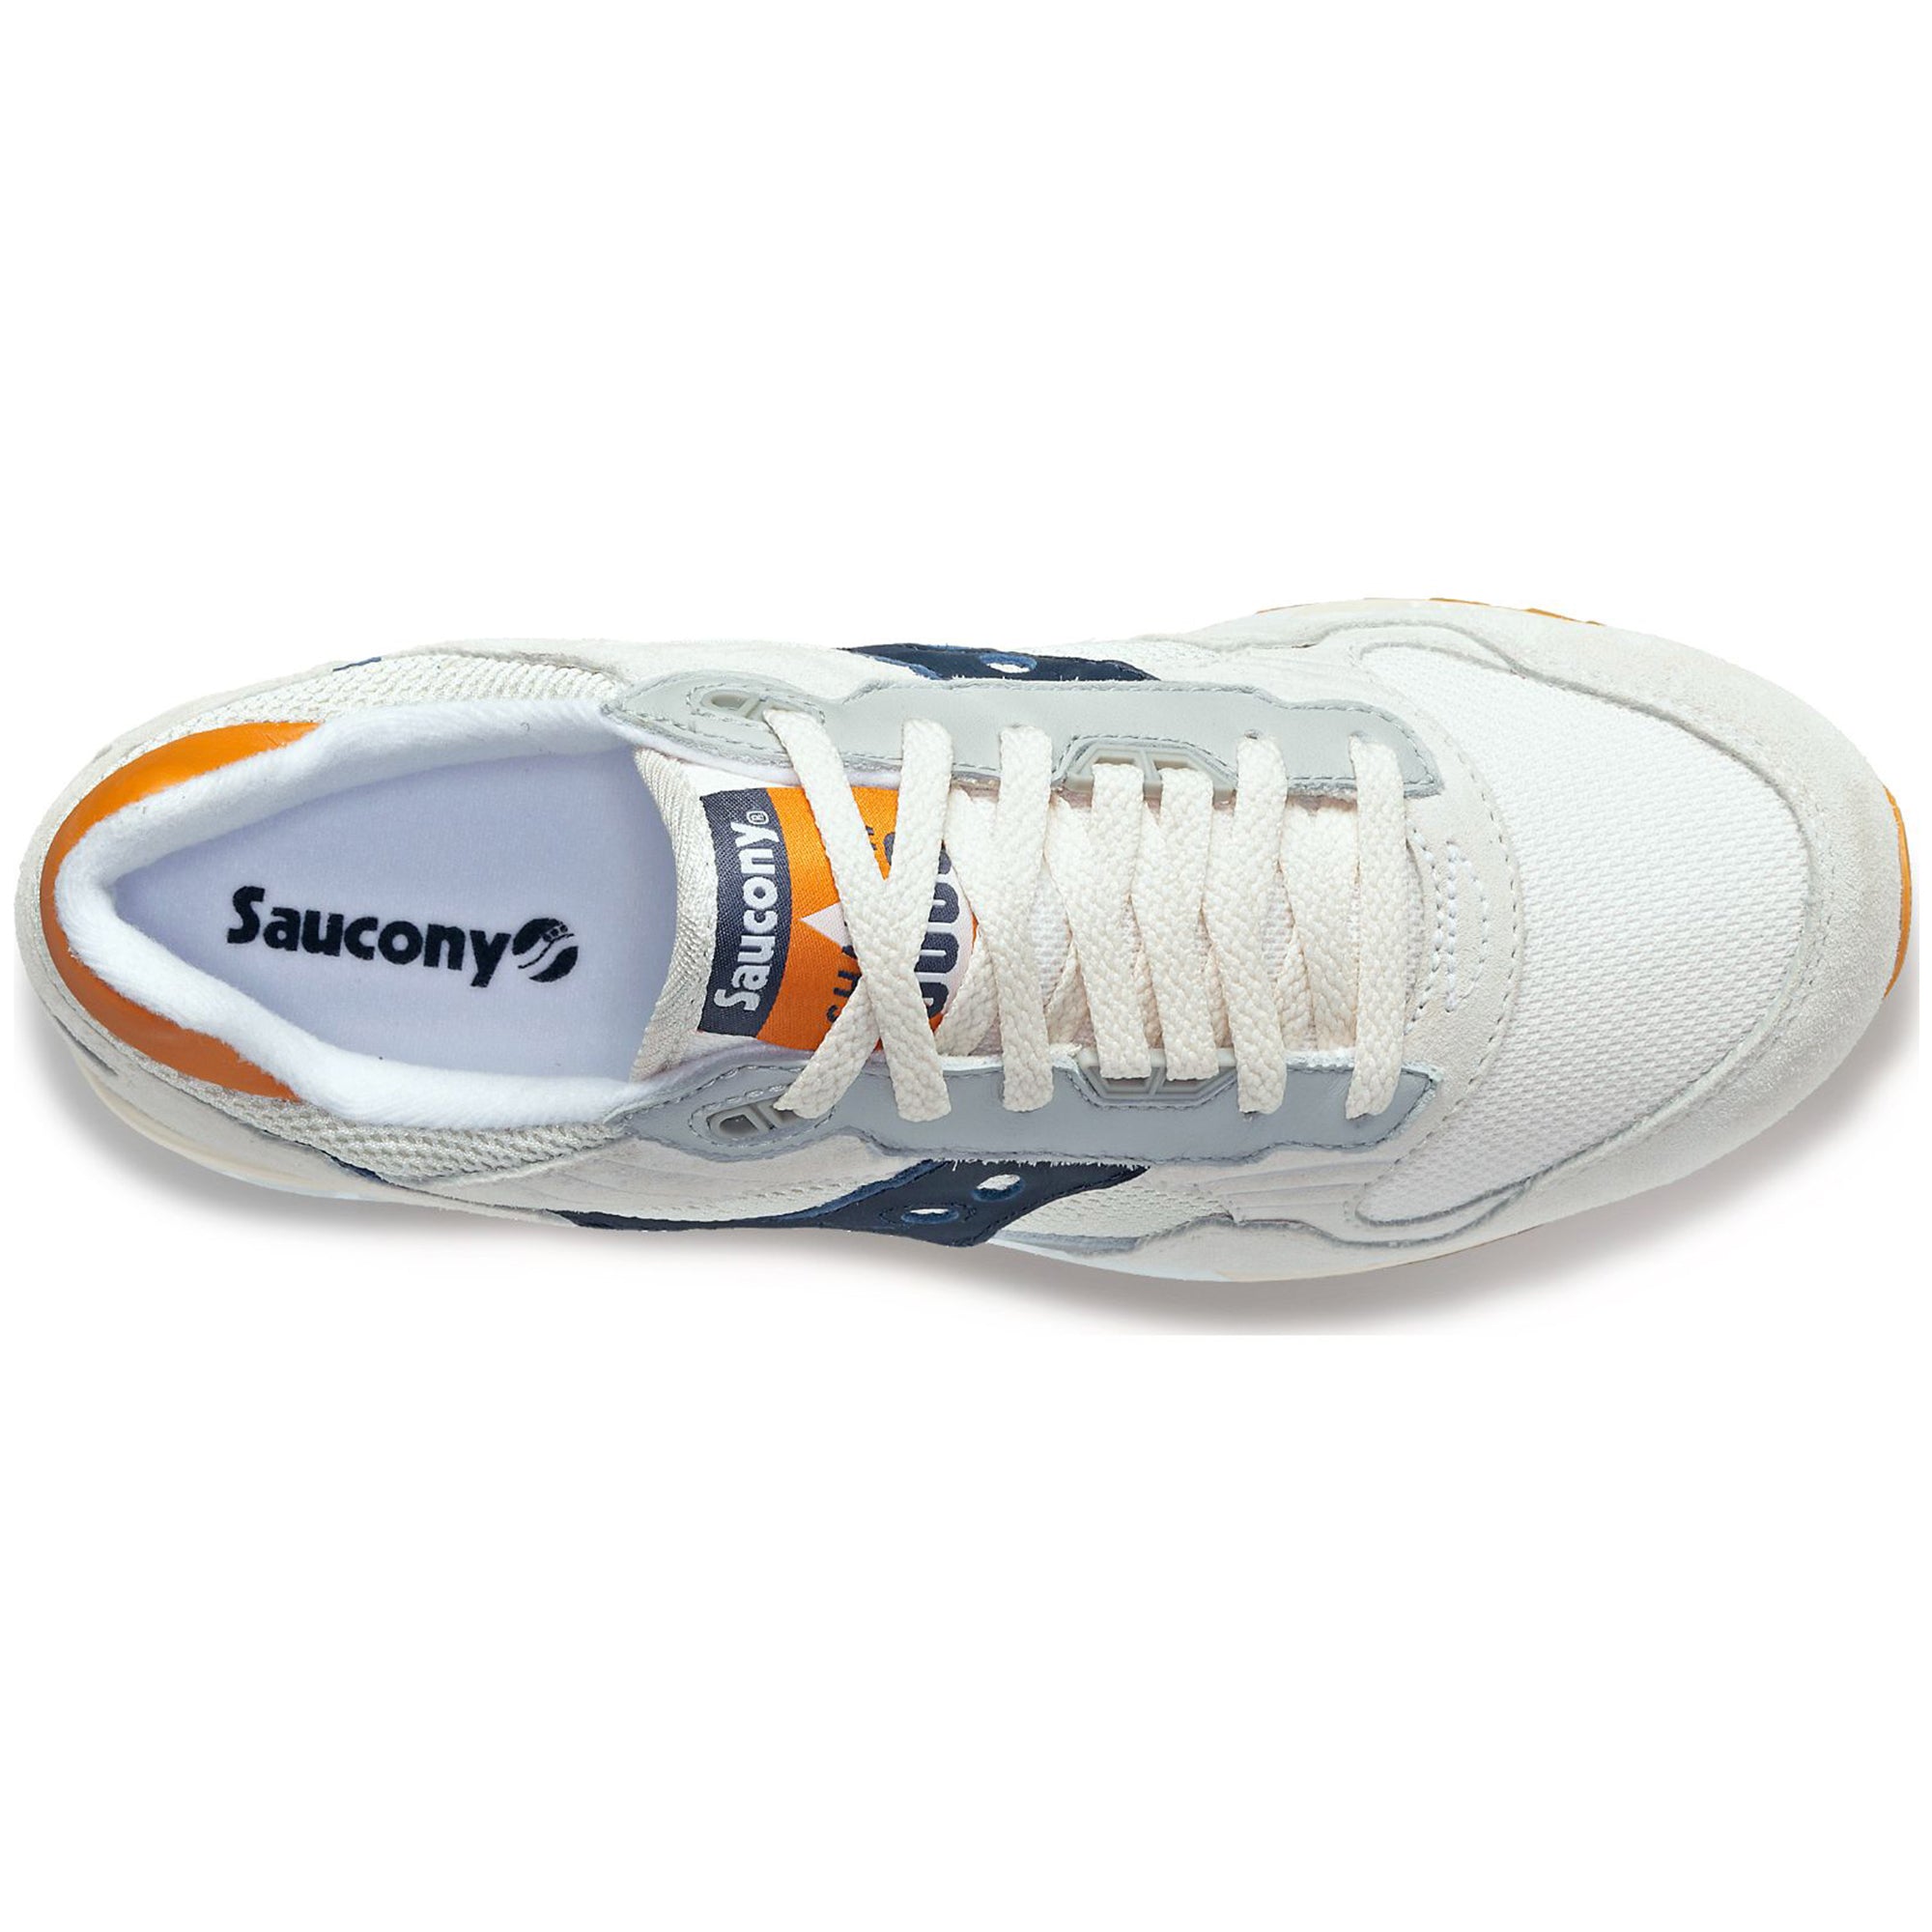 Saucony Shadow 5000 Premium Pack Trainers - Grey/Navy